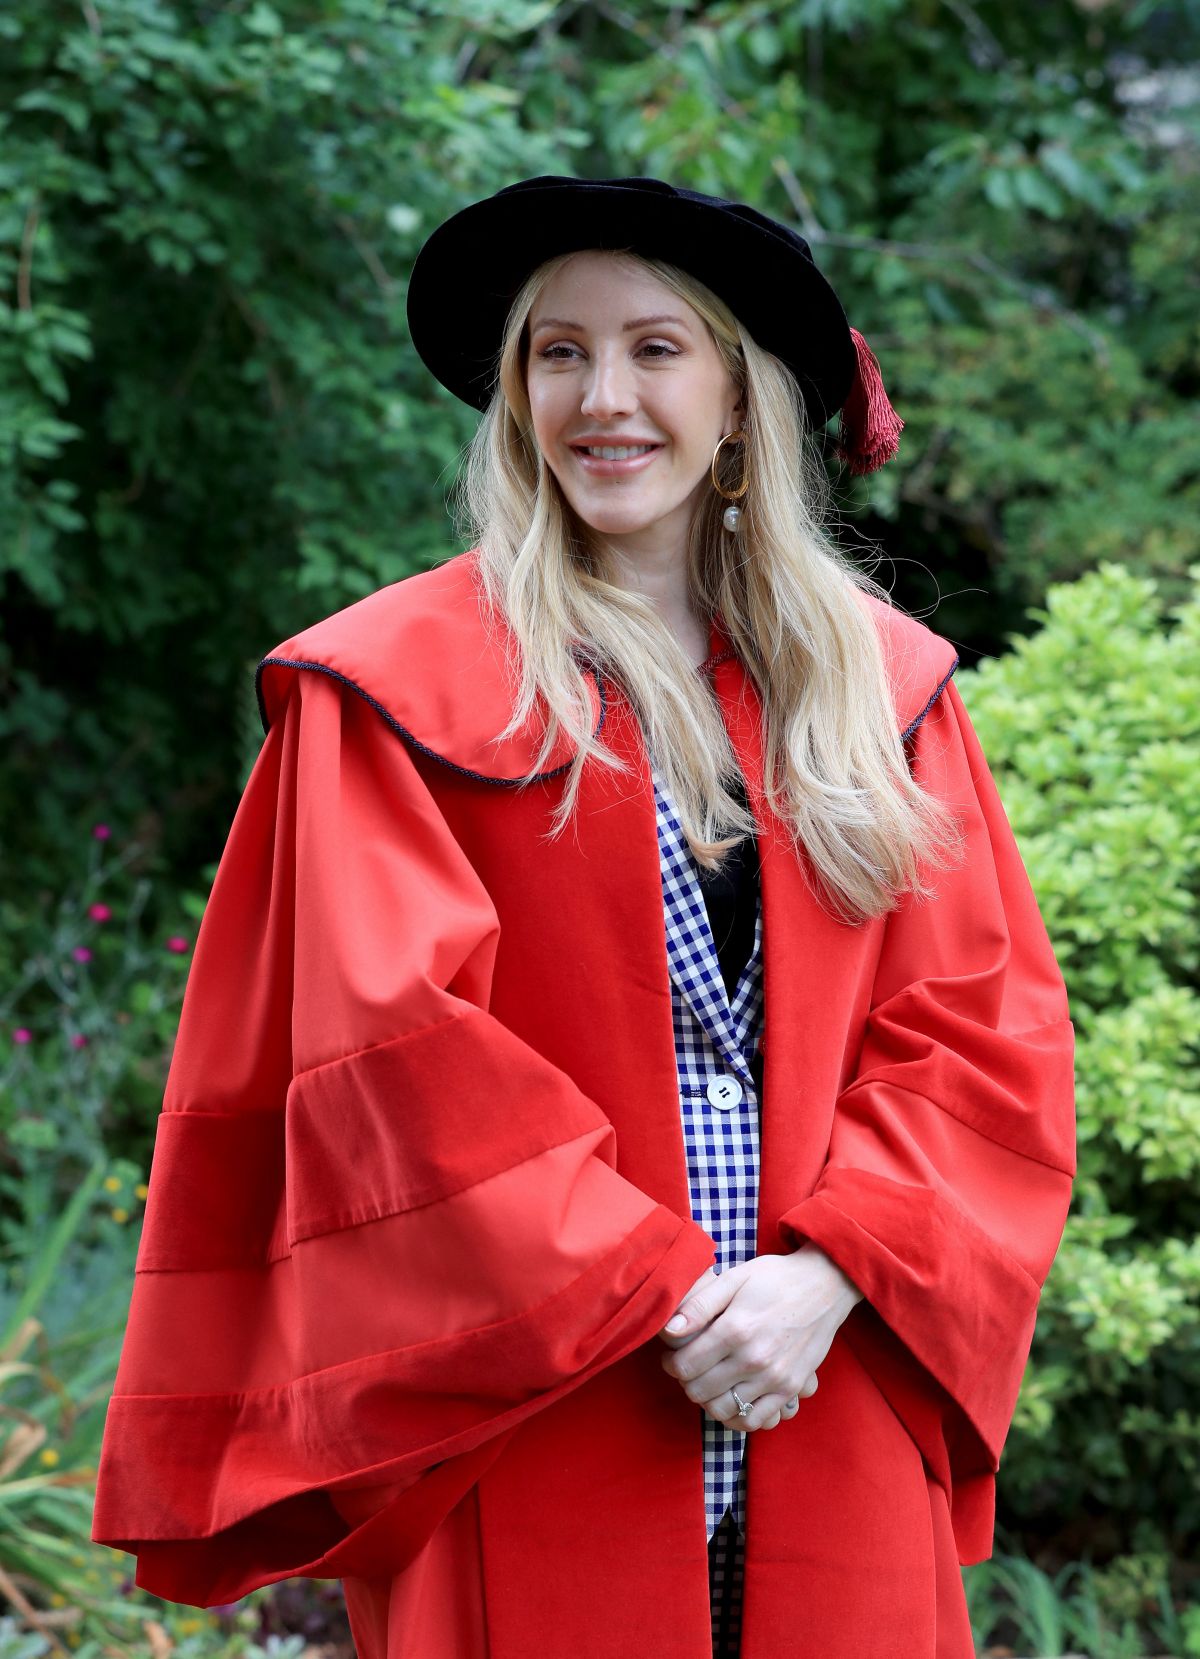 Ellie Goulding Receiving Honorary Doctor Of Arts Degree From The University Of Kent 07 18 2019